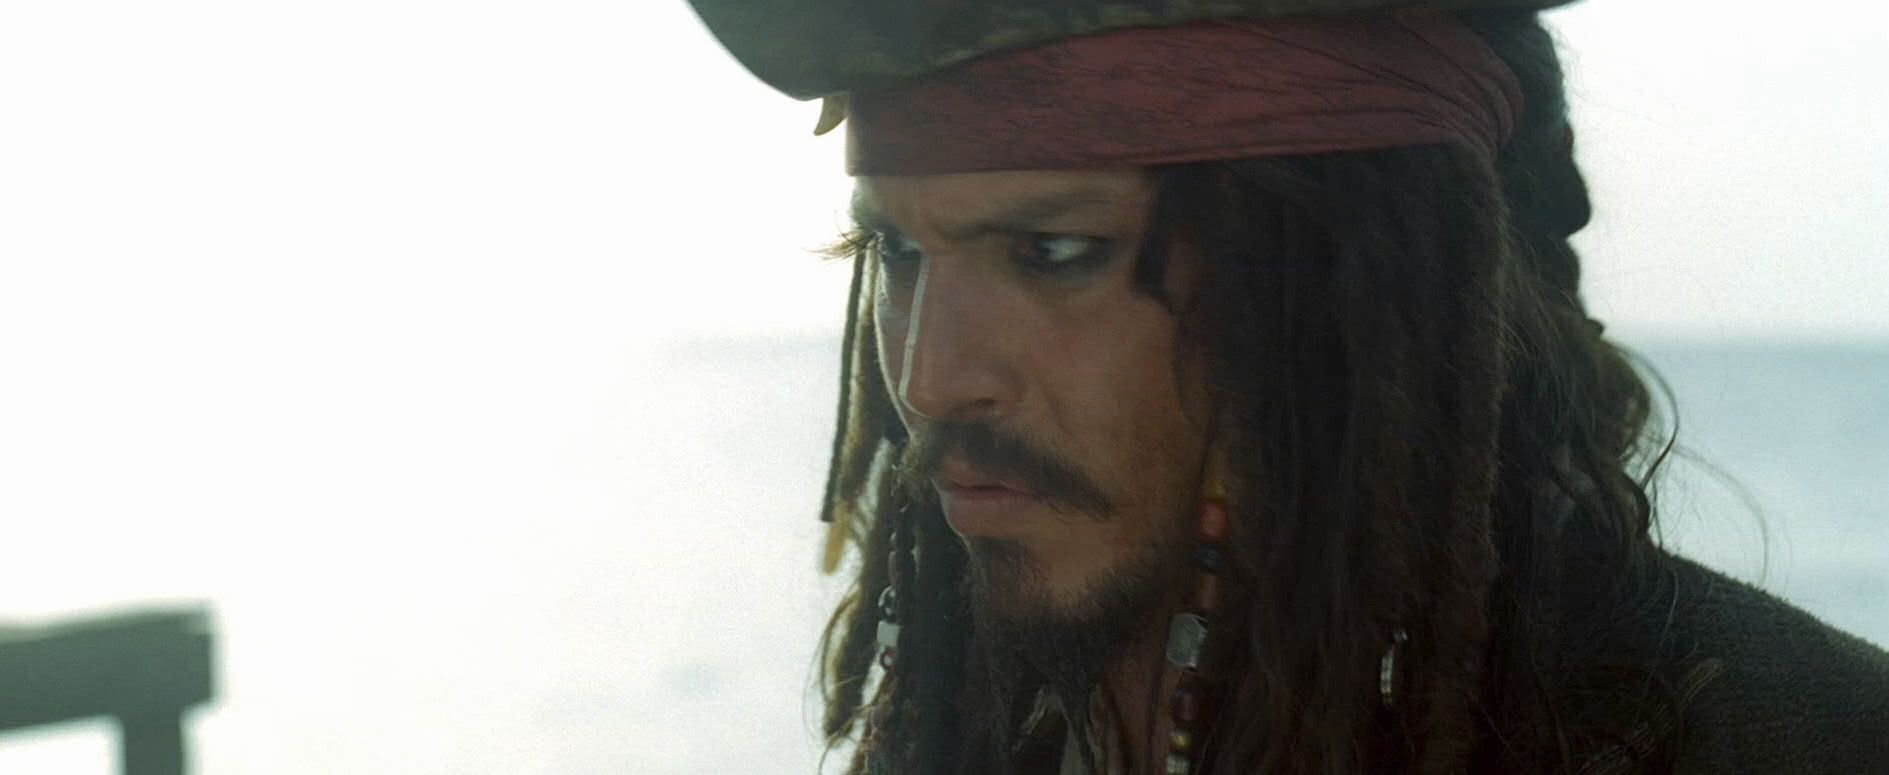 http://i4.photobucket.com/albums/y144/deepintodepp/Pirates%20At%20Worlds%20End/ScreenCaps%20from%20Clips/000000247.jpg